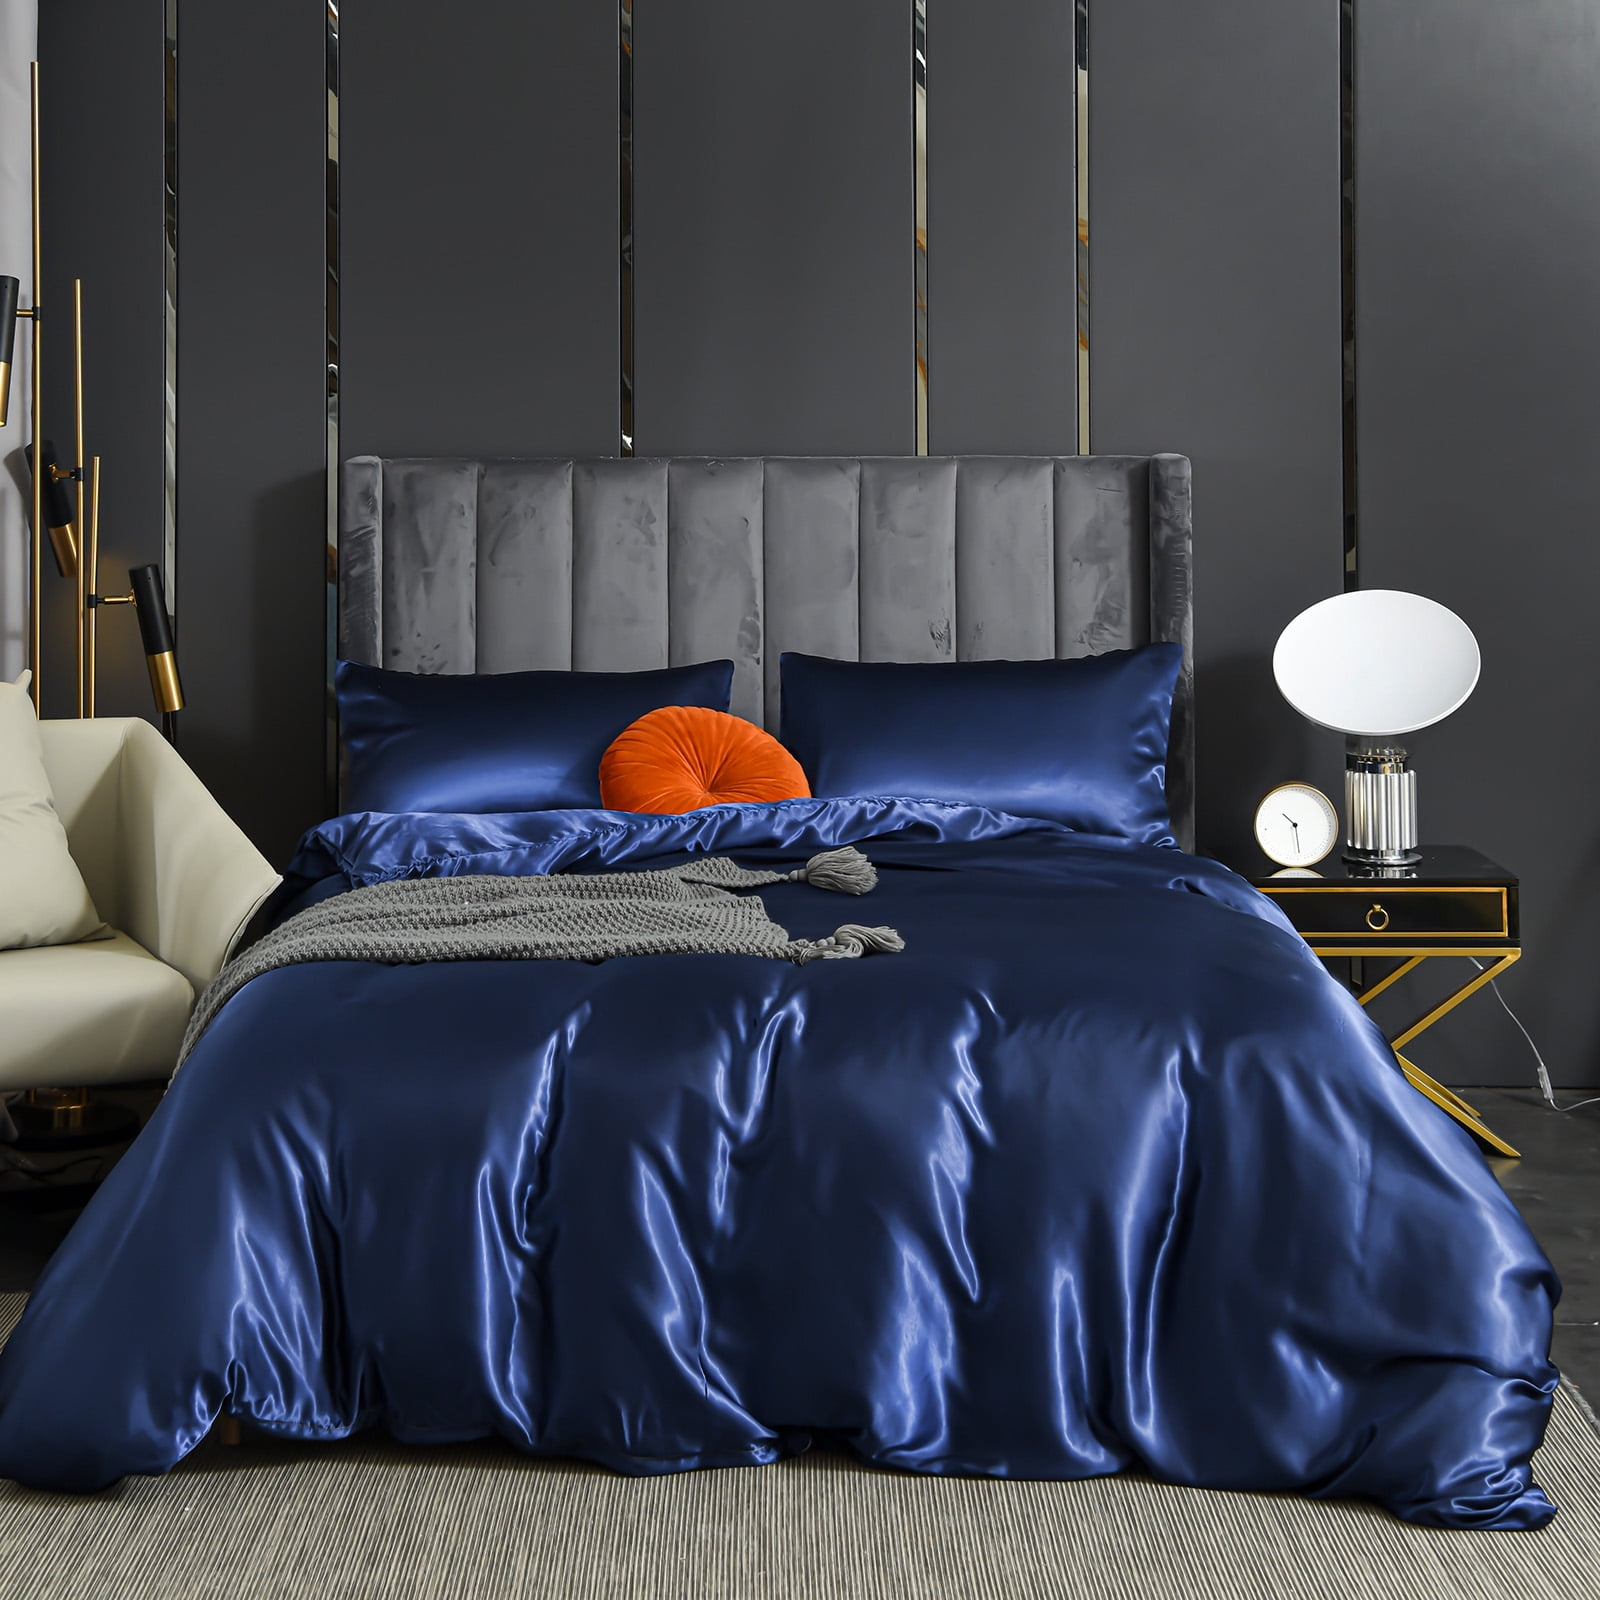 Buy Move Over Navy Blue Satin Duvet Cover Set Queen Silk Like Satin Bedding Sets Solid Pattern No Filling Online in India. 251803021